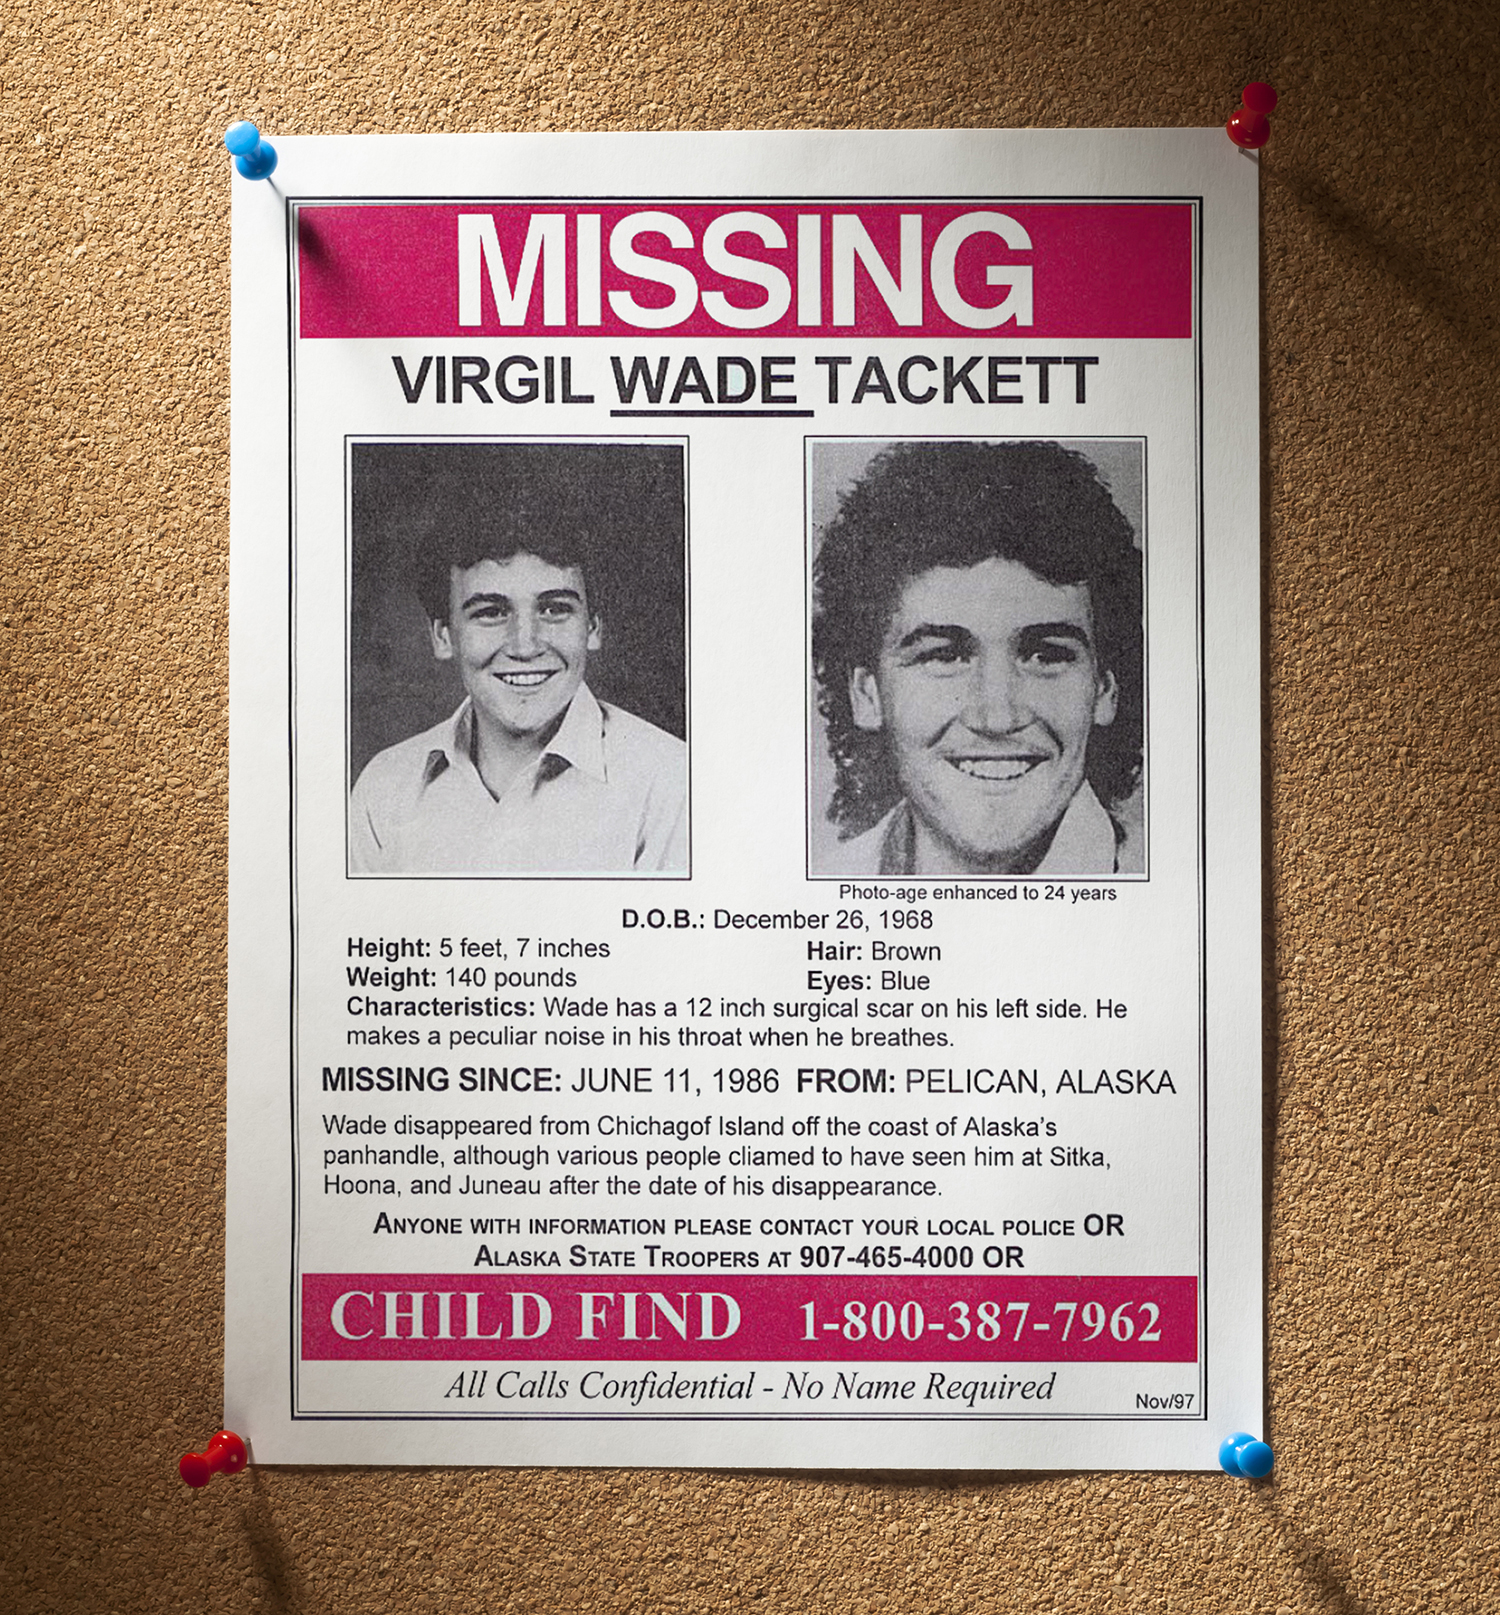 A missing poster for lost person Wade Tackett